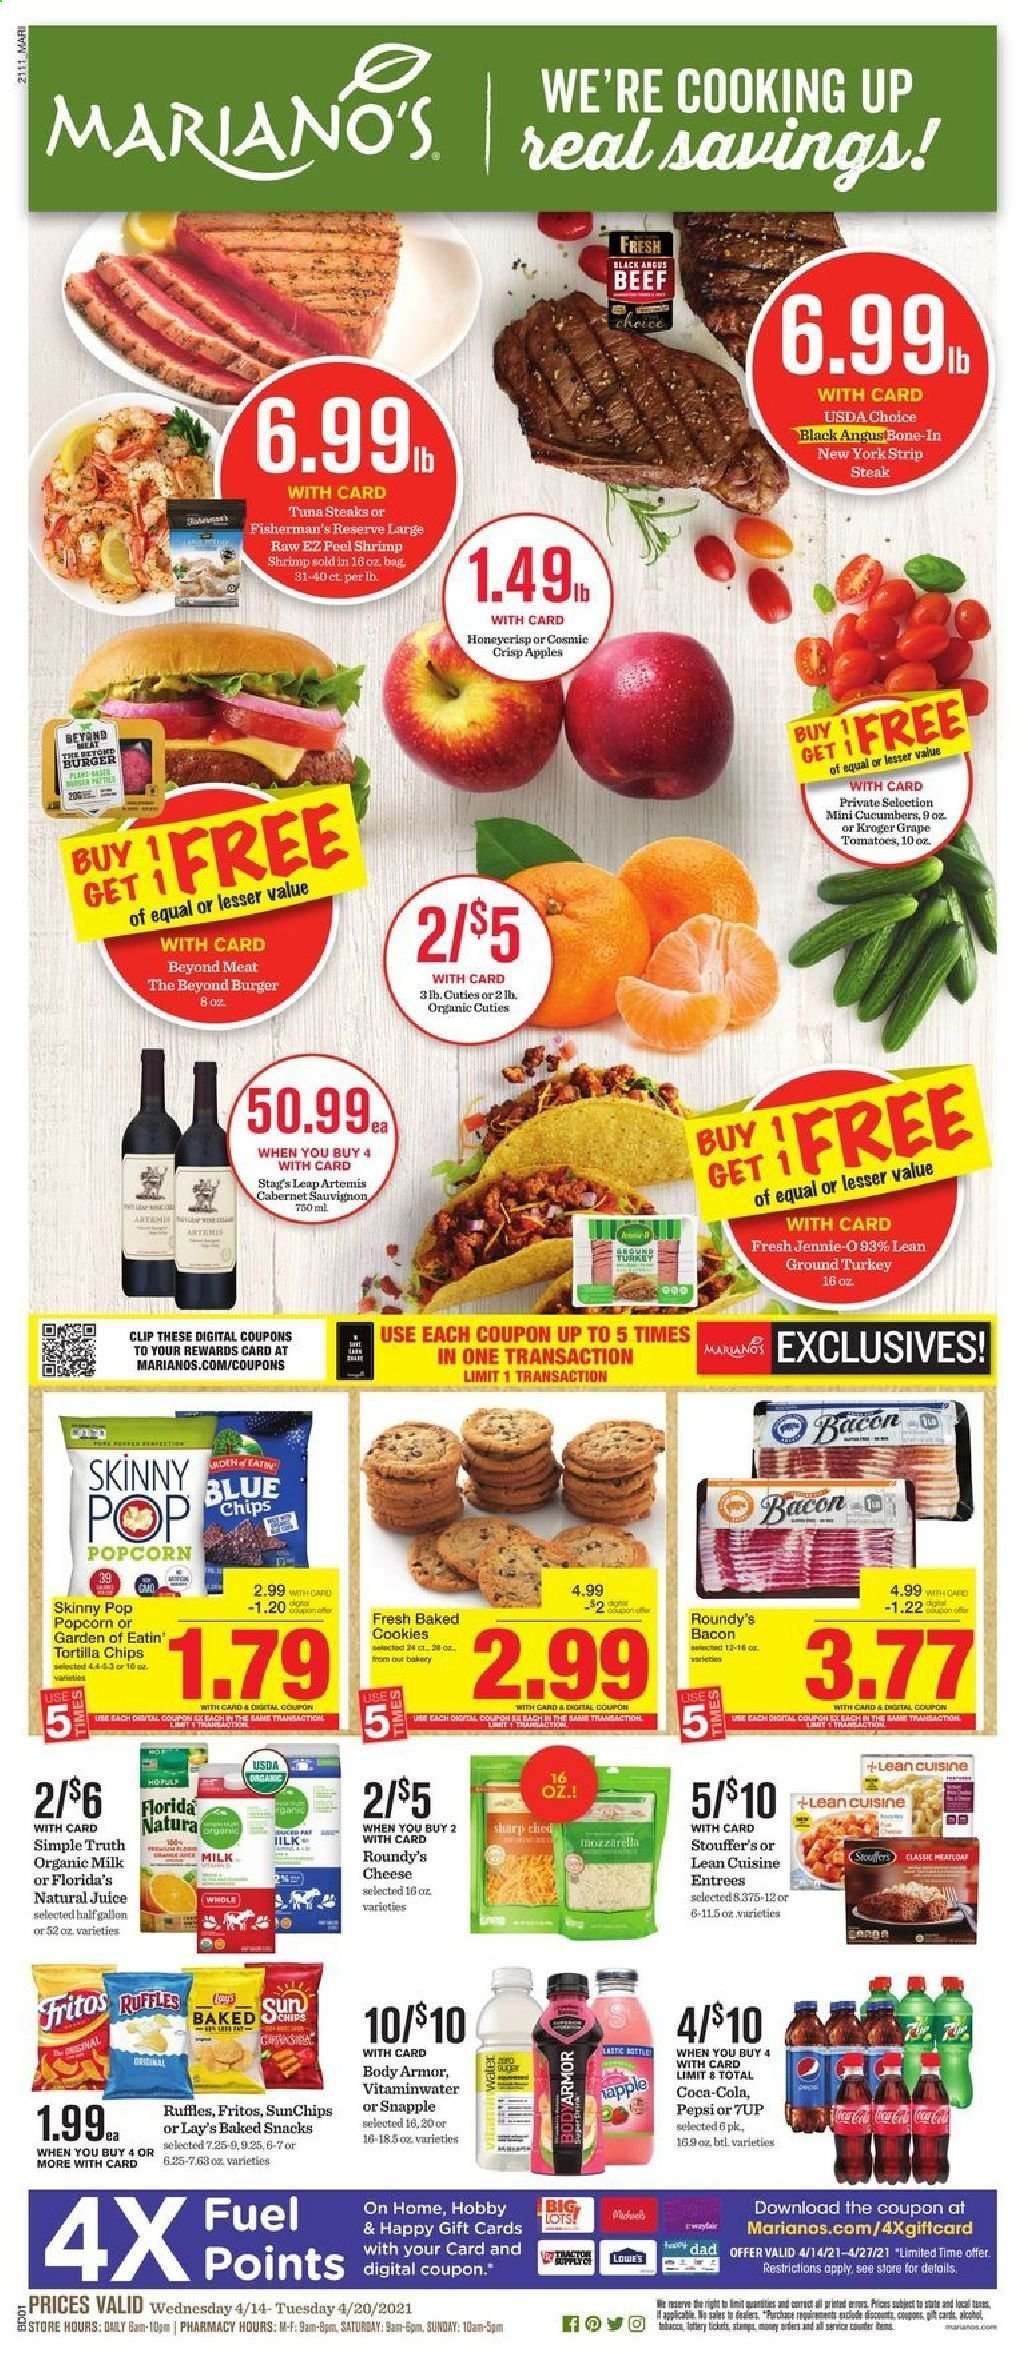 thumbnail - Mariano’s Flyer - 04/14/2021 - 04/20/2021 - Sales products - apples, tuna, shrimps, hamburger, Lean Cuisine, bacon, mozzarella, cheese, organic milk, Stouffer's, snack, Florida's Natural, Fritos, tortilla chips, chips, Lay’s, popcorn, Ruffles, Skinny Pop, Coca-Cola, Pepsi, juice, 7UP, Snapple, Cabernet Sauvignon, ground turkey, beef meat, steak, striploin steak. Page 1.